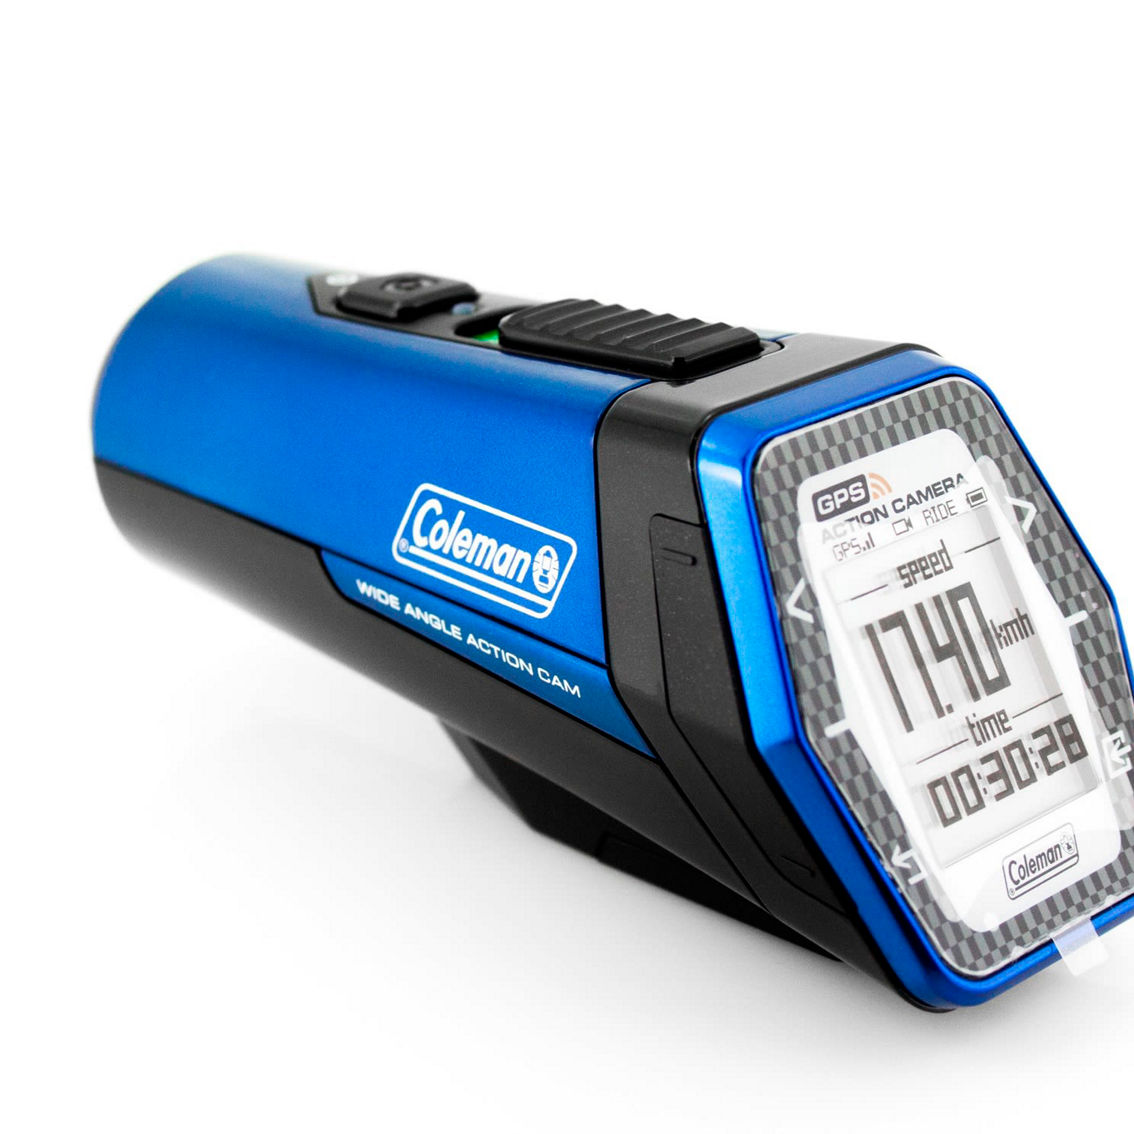 COLEMAN® 1080p HD / 16.0 MP Waterproof Sports & Exercise Camera w/Built-in GPS - Image 2 of 3